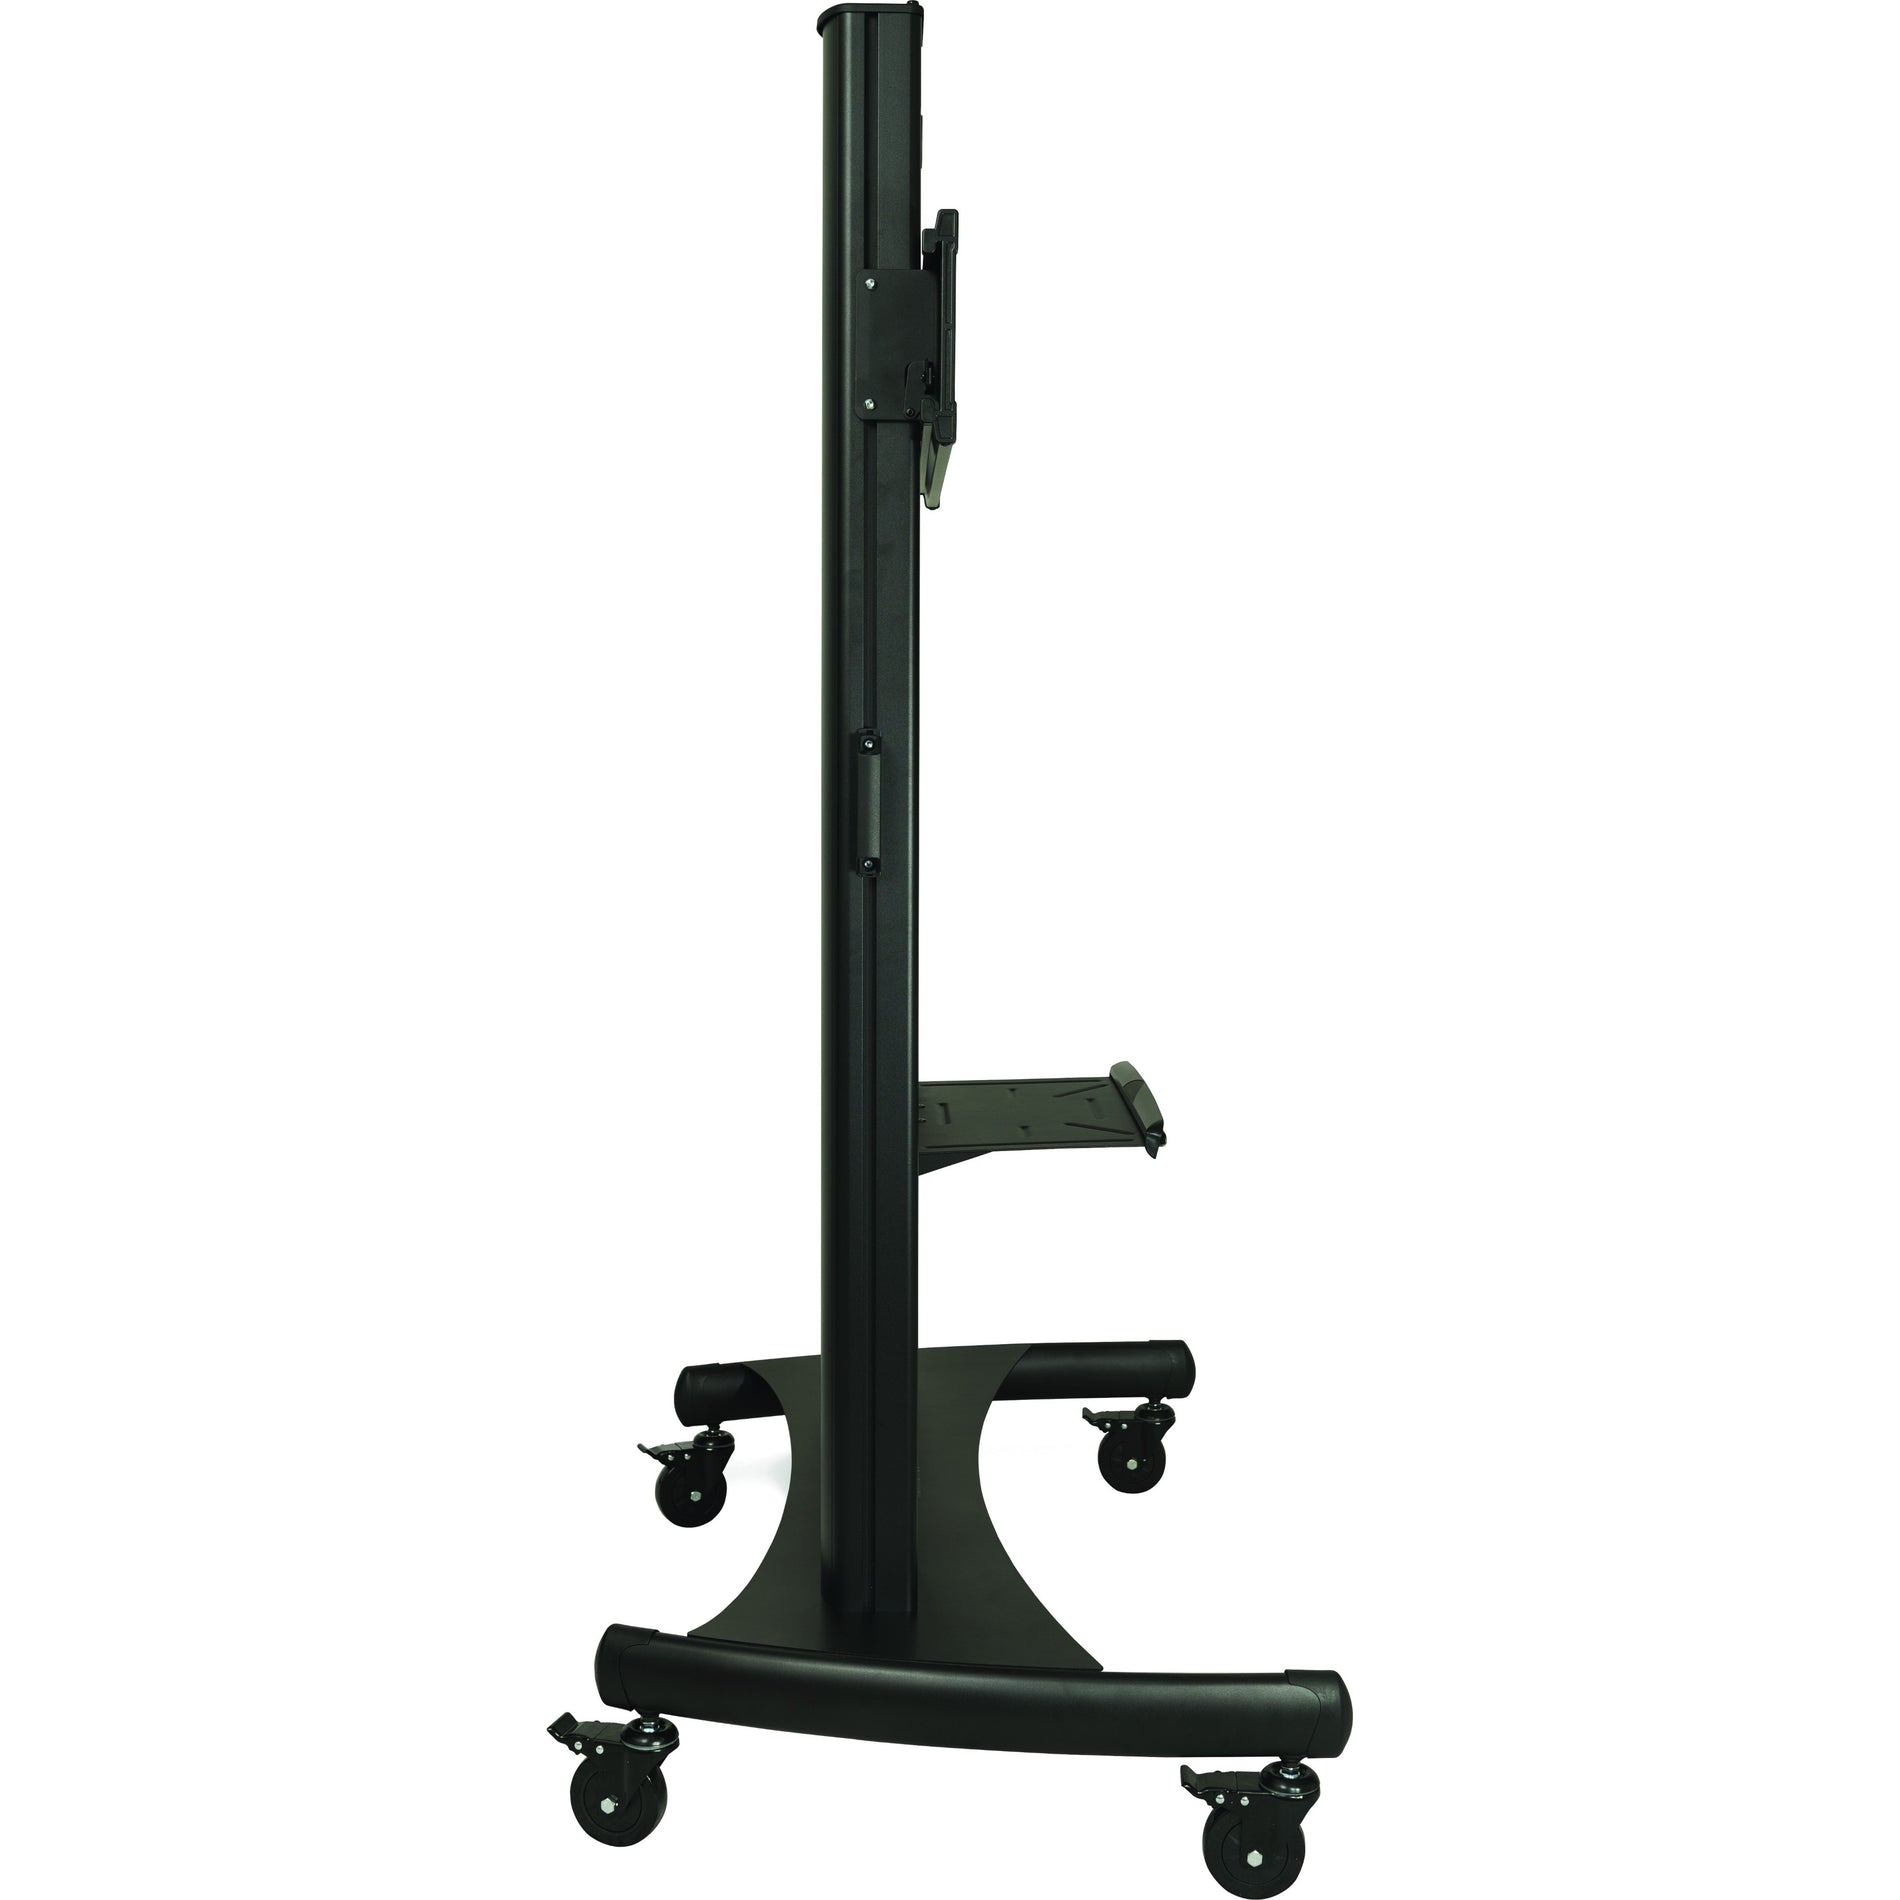 InFocus INA-MCARTDX Deluxe Mobile Cart for up to 100-inch Display, Lockable Caster, Cable Management, Height Adjustable, 300 lb Maximum Load Capacity